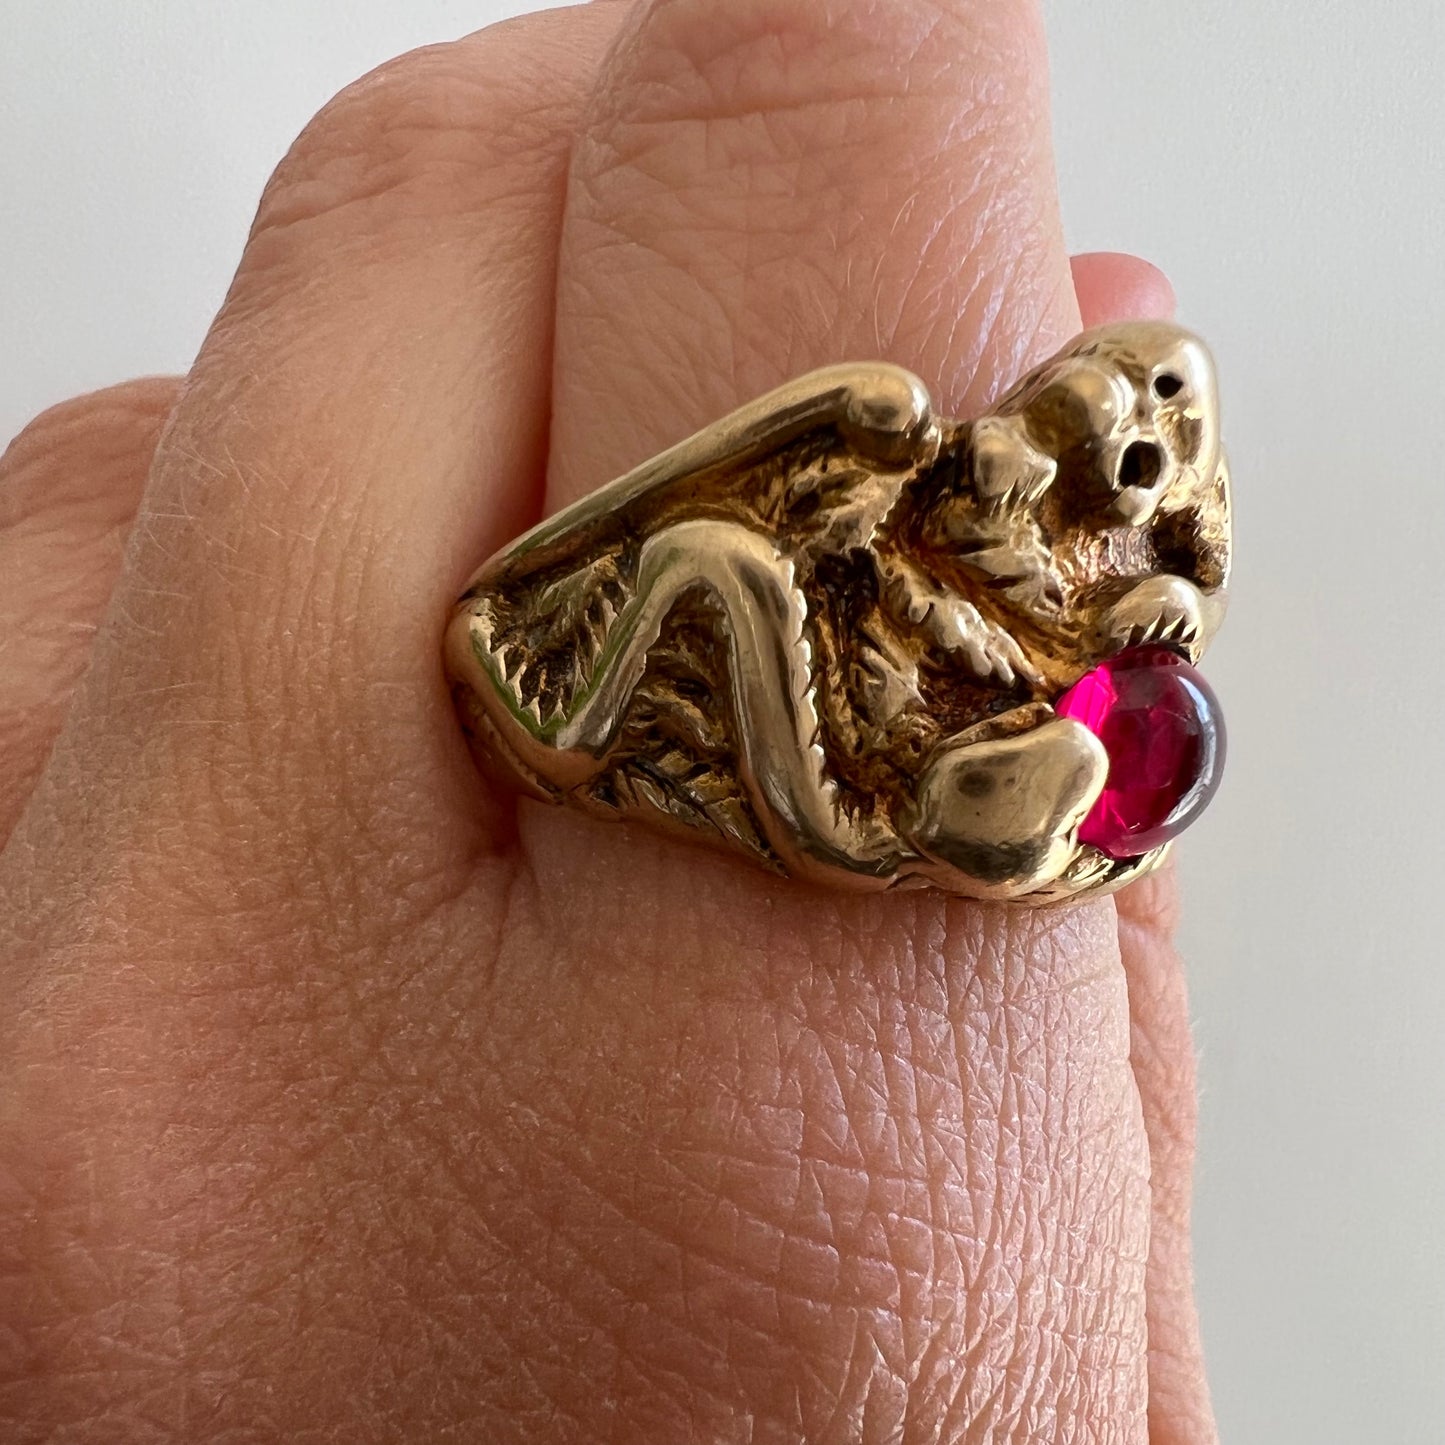 V I N T A G E // protective duo / 10k and red stone lion and snake ring / size 9.75-10